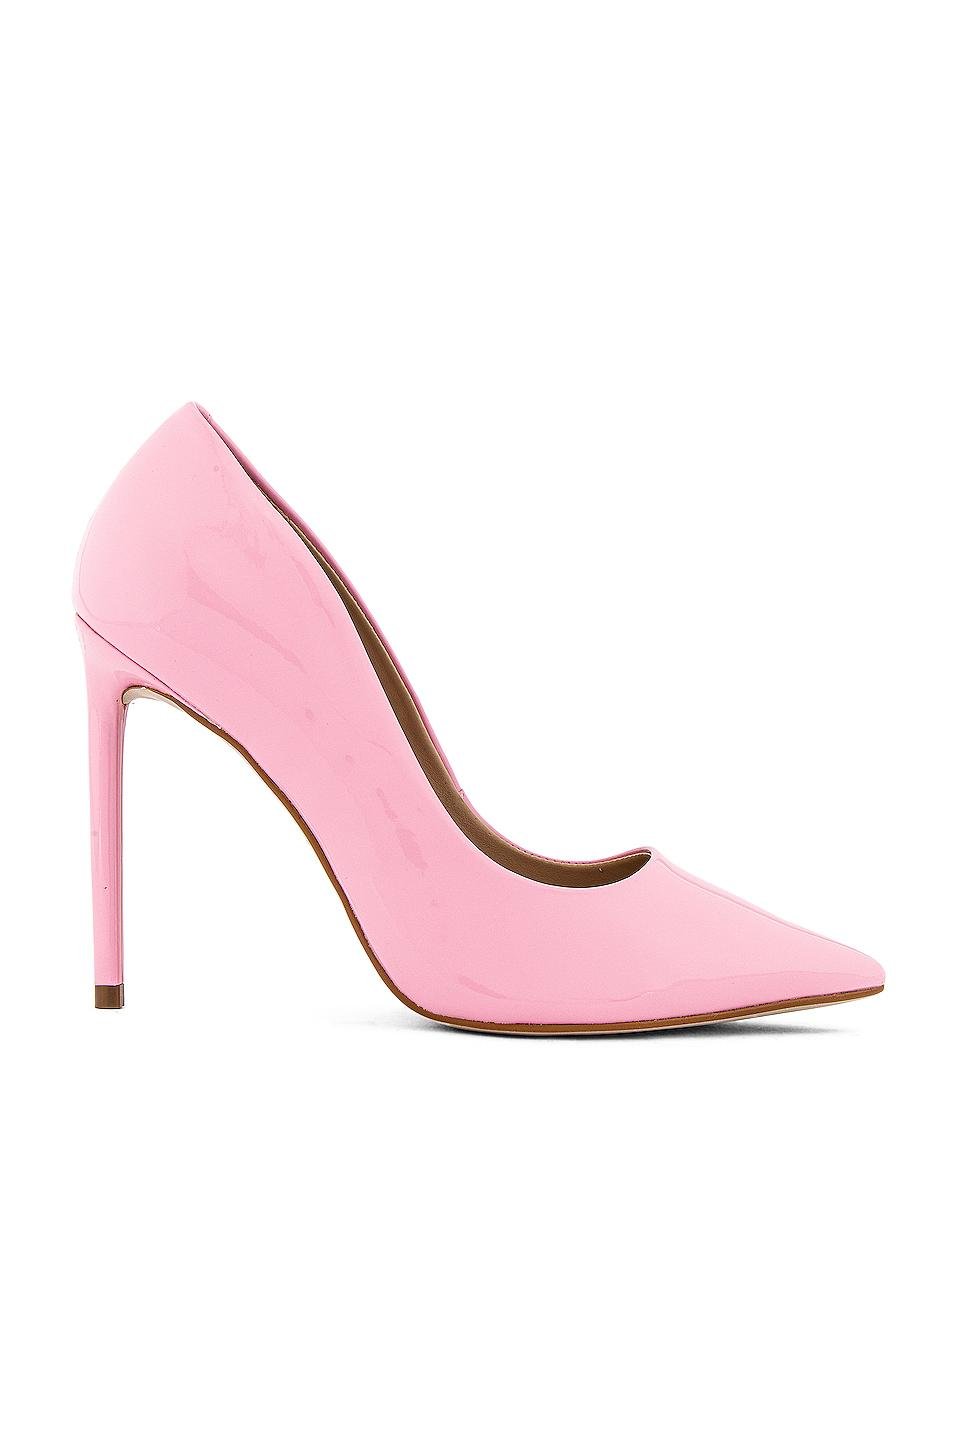 Steve Madden Leather Vala Pump in Pink Patent (Pink) - Lyst